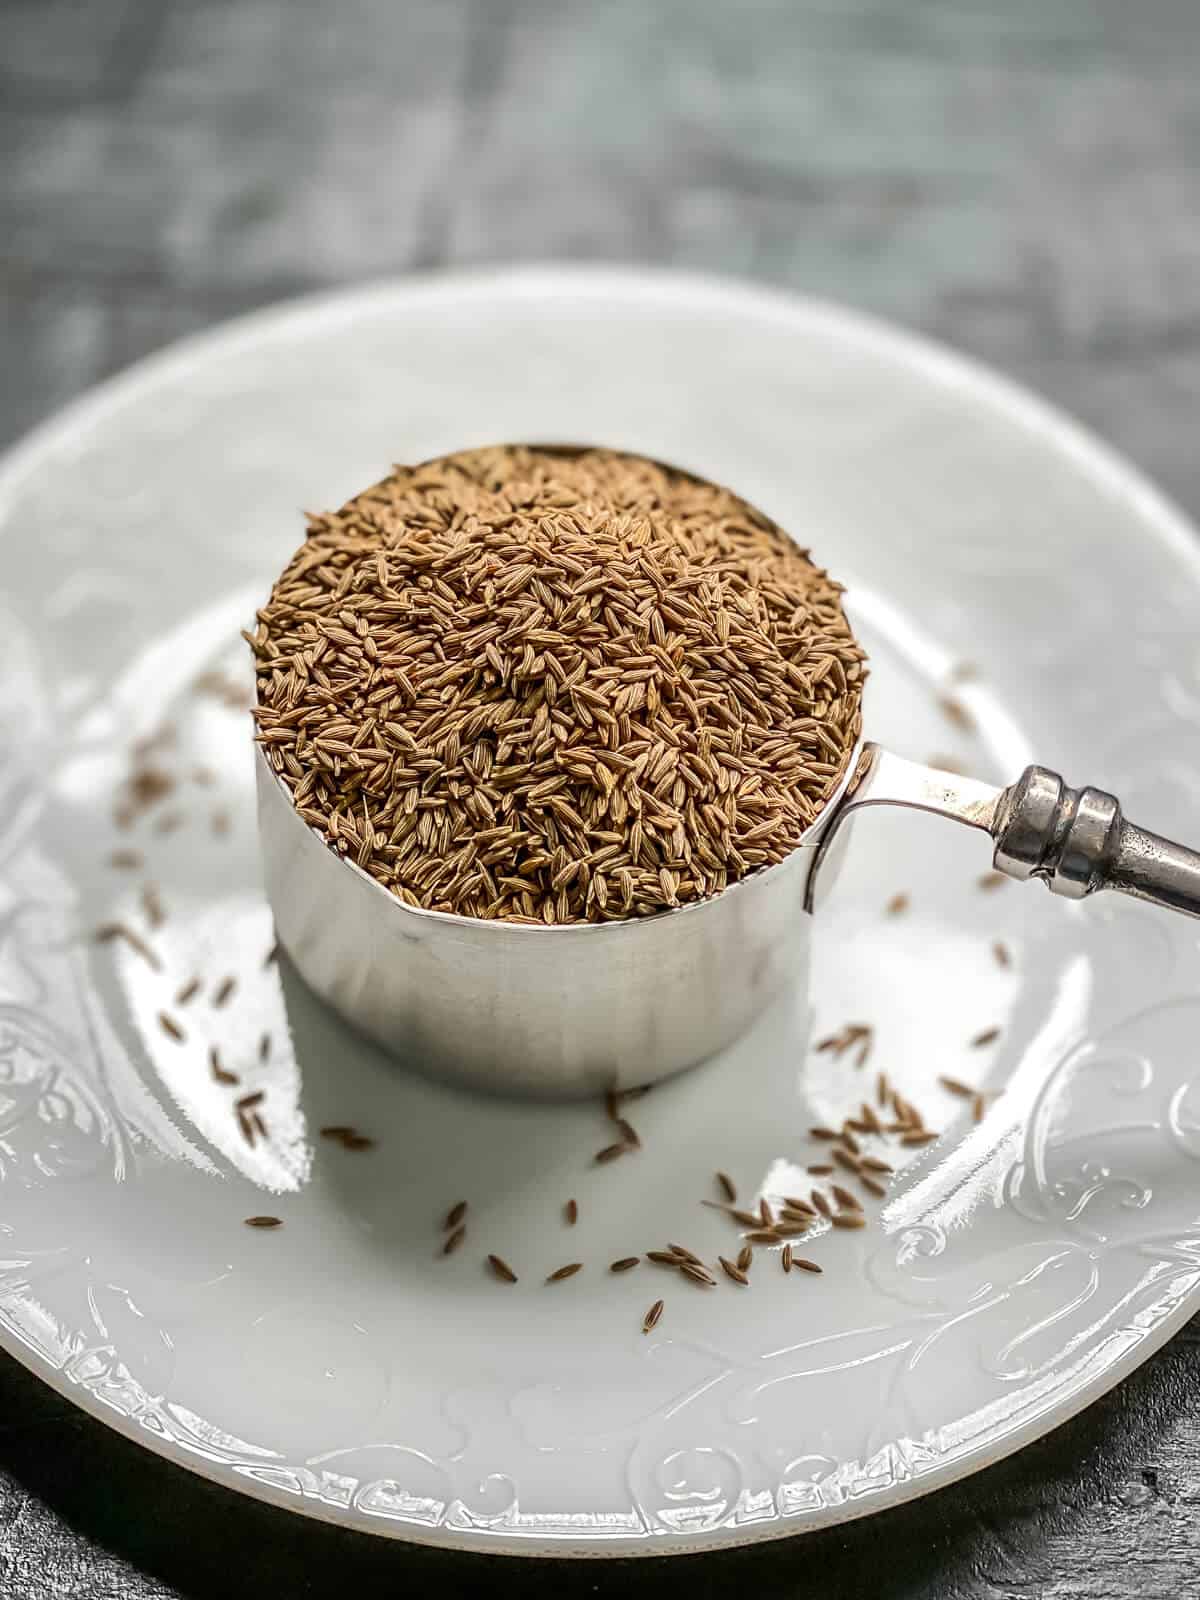 Cumin seeds in a measuring cup placed on a white plate